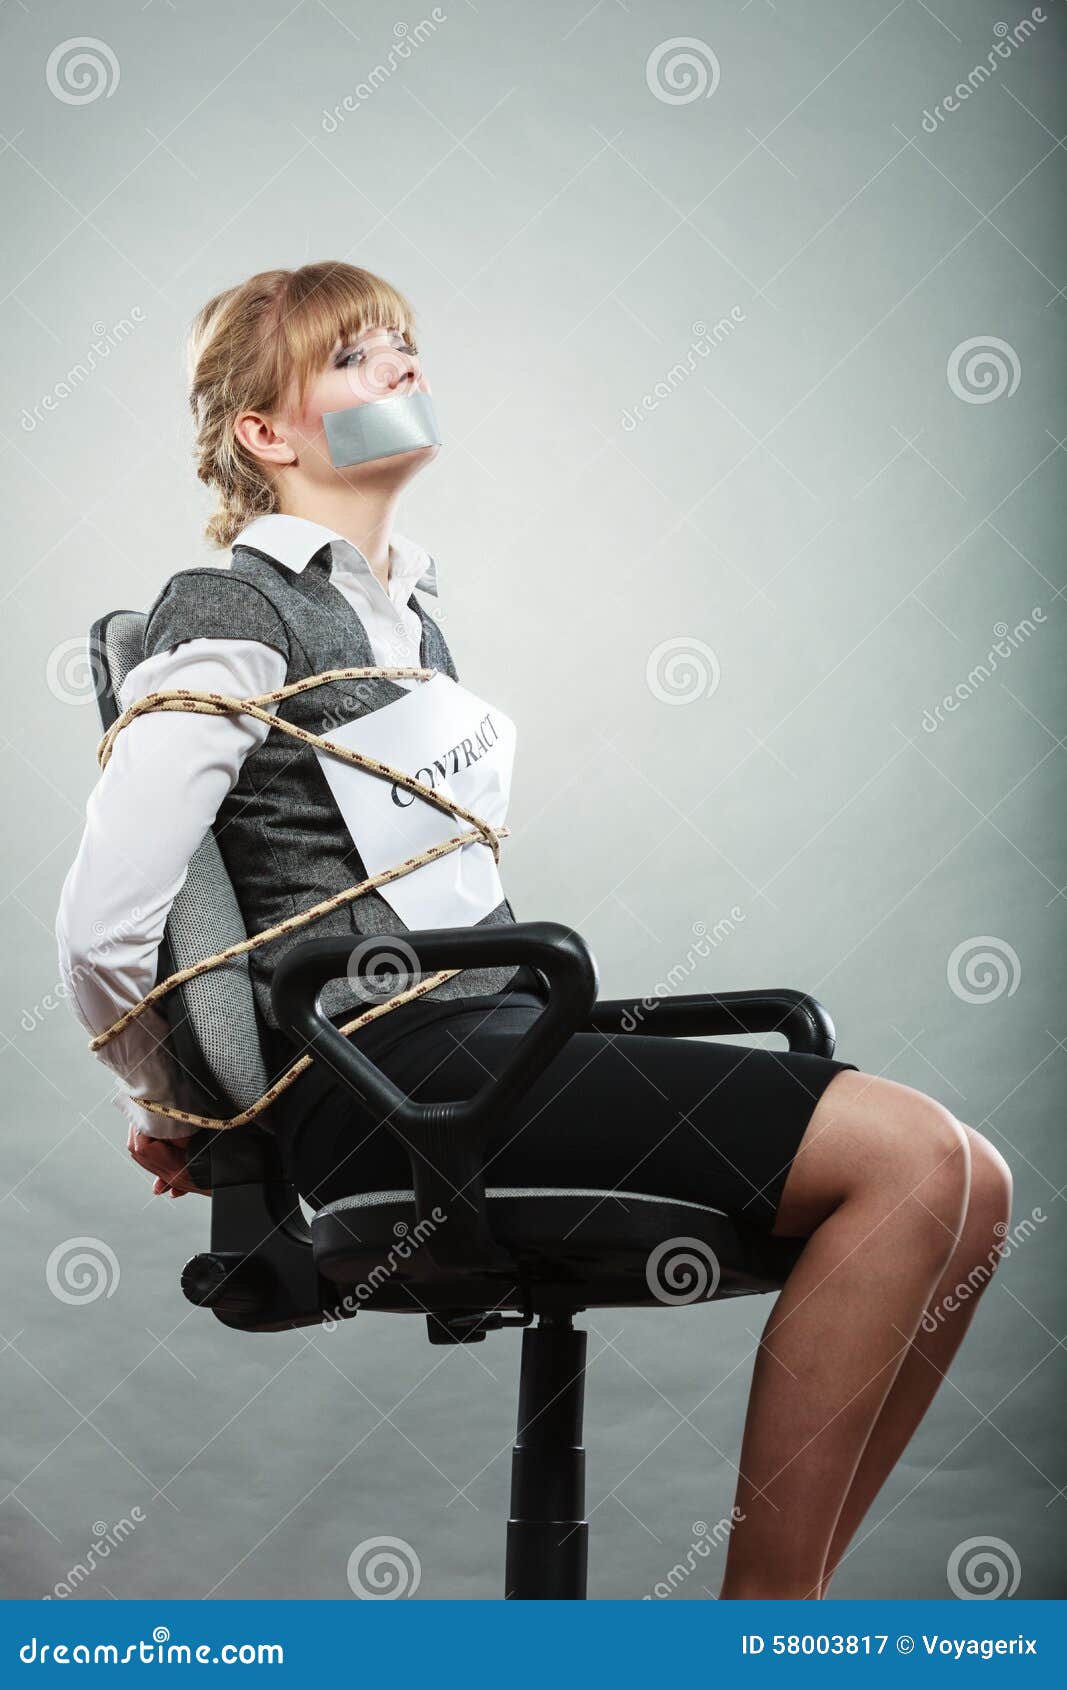 Women Tied To Chair kissing sex